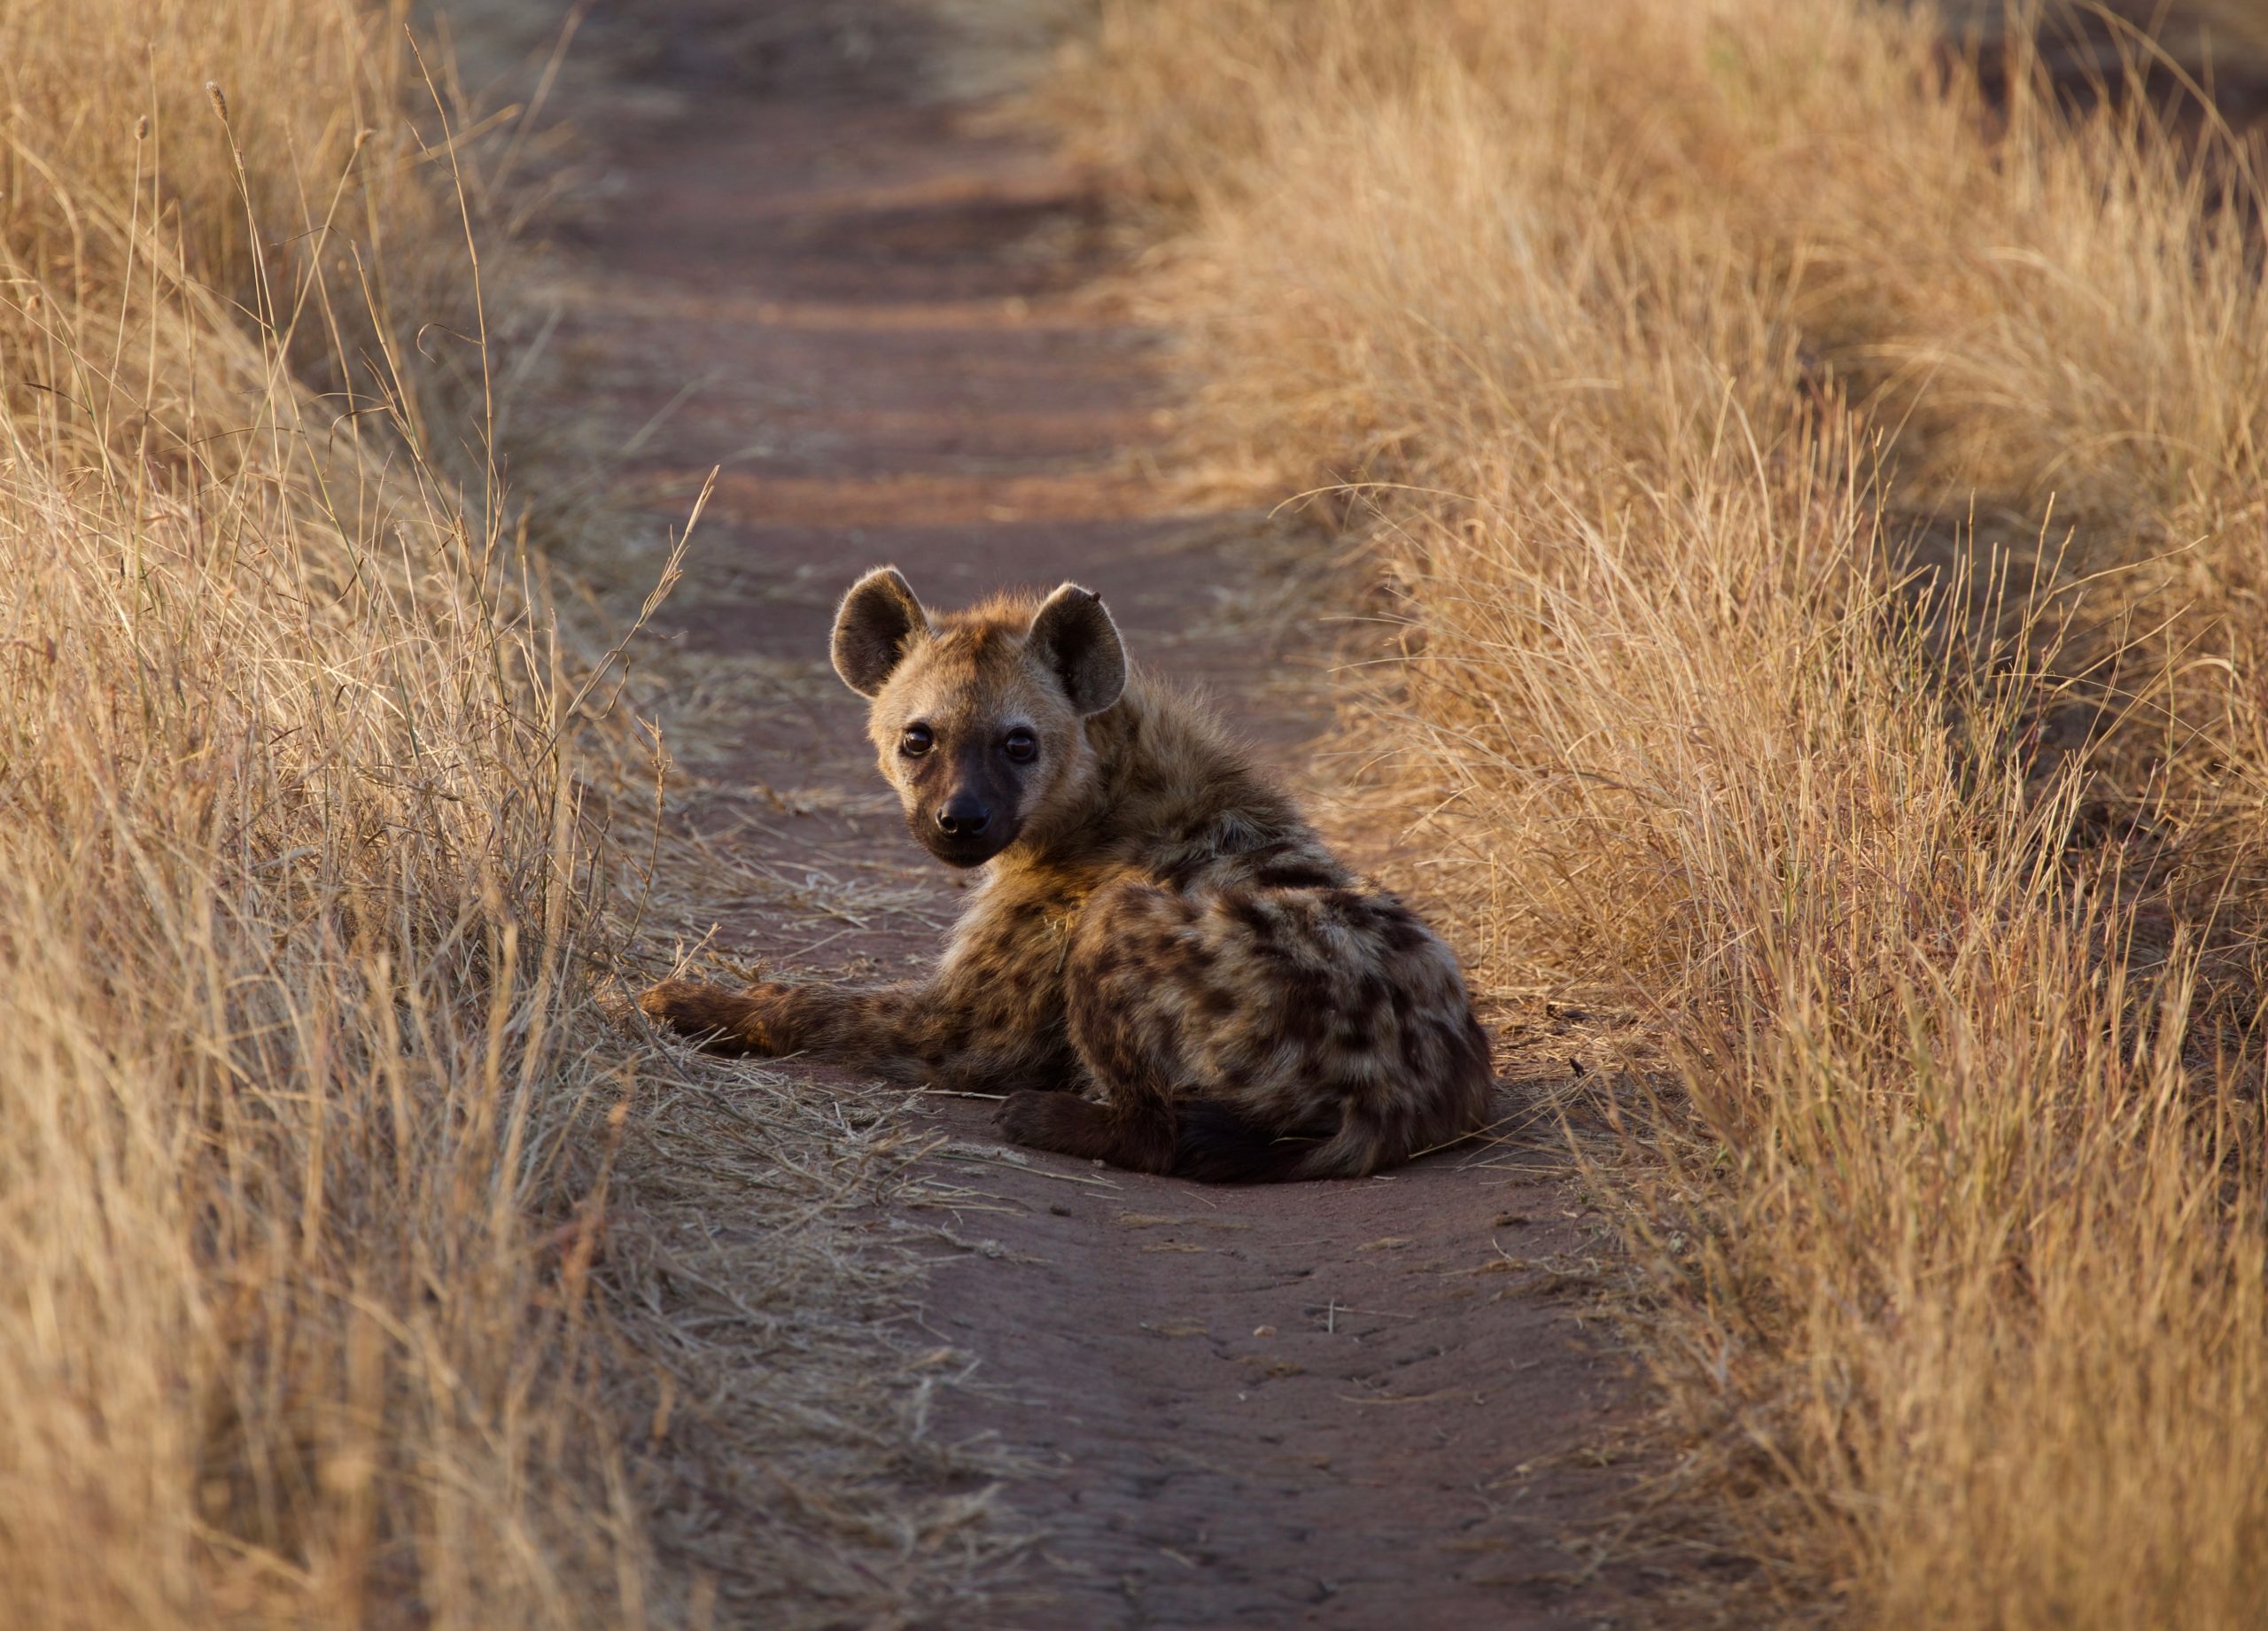 A hyena sits in a dirt path among dry grass in tanzania